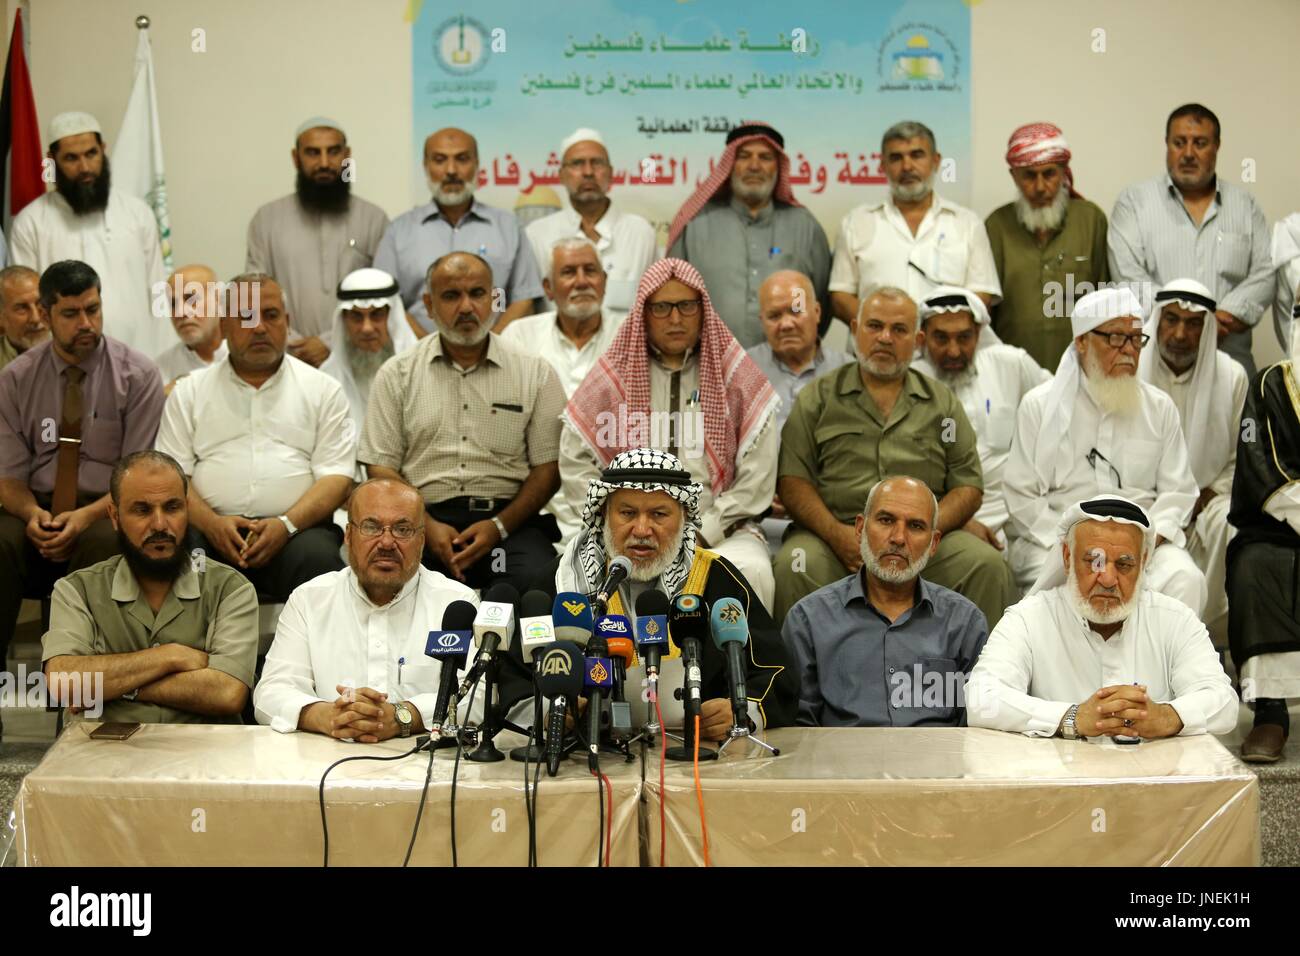 Gaza City, Gaza Strip, Palestinian Territory. 30th July, 2017. Marwan Abu Ras, a head of the Palestine Scholars Association, speaks during a press conference to show solidarity with Palestinians in Jerusalem, in Gaza city on July 30, 2017 Credit: Ashraf Amra/APA Images/ZUMA Wire/Alamy Live News Stock Photo